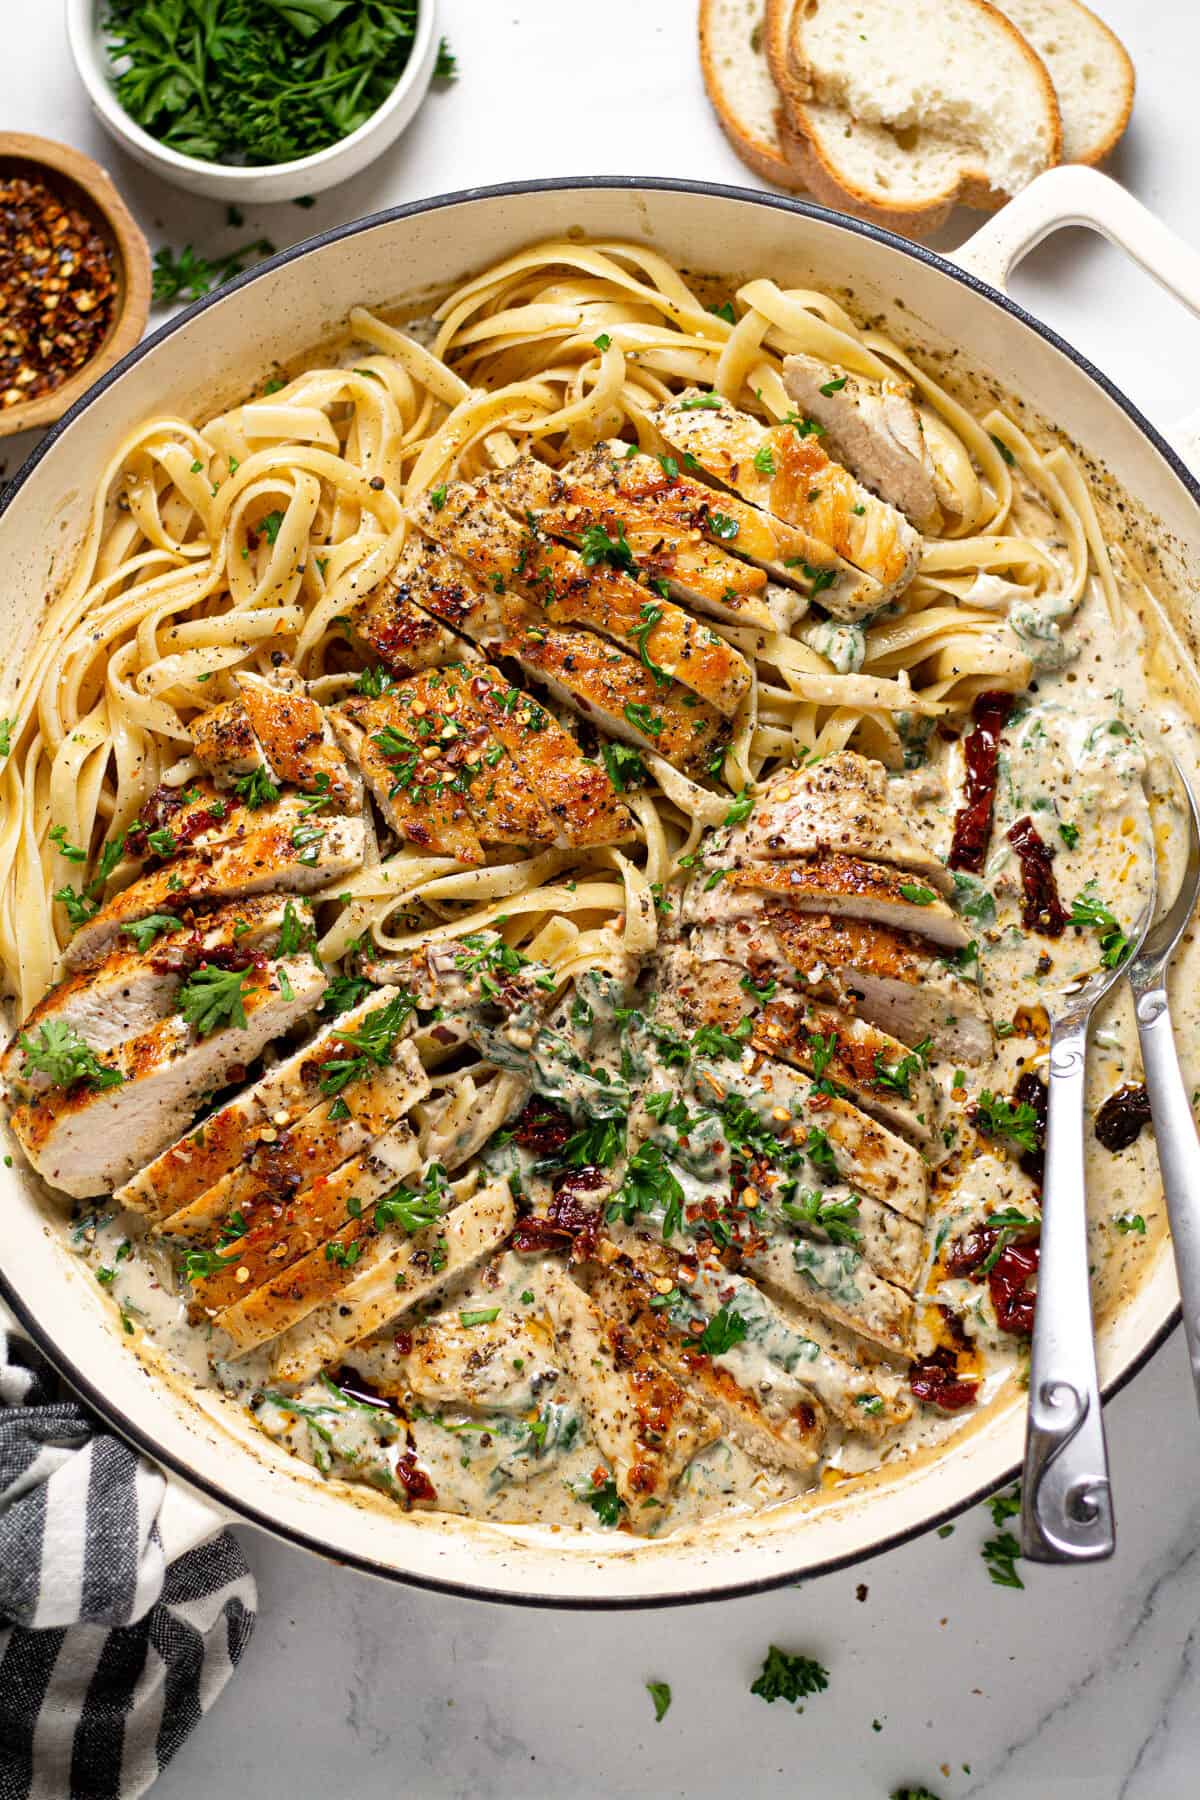 Overhead shot of a pan filled with creamy Tuscan chicken over fettuccine noodles